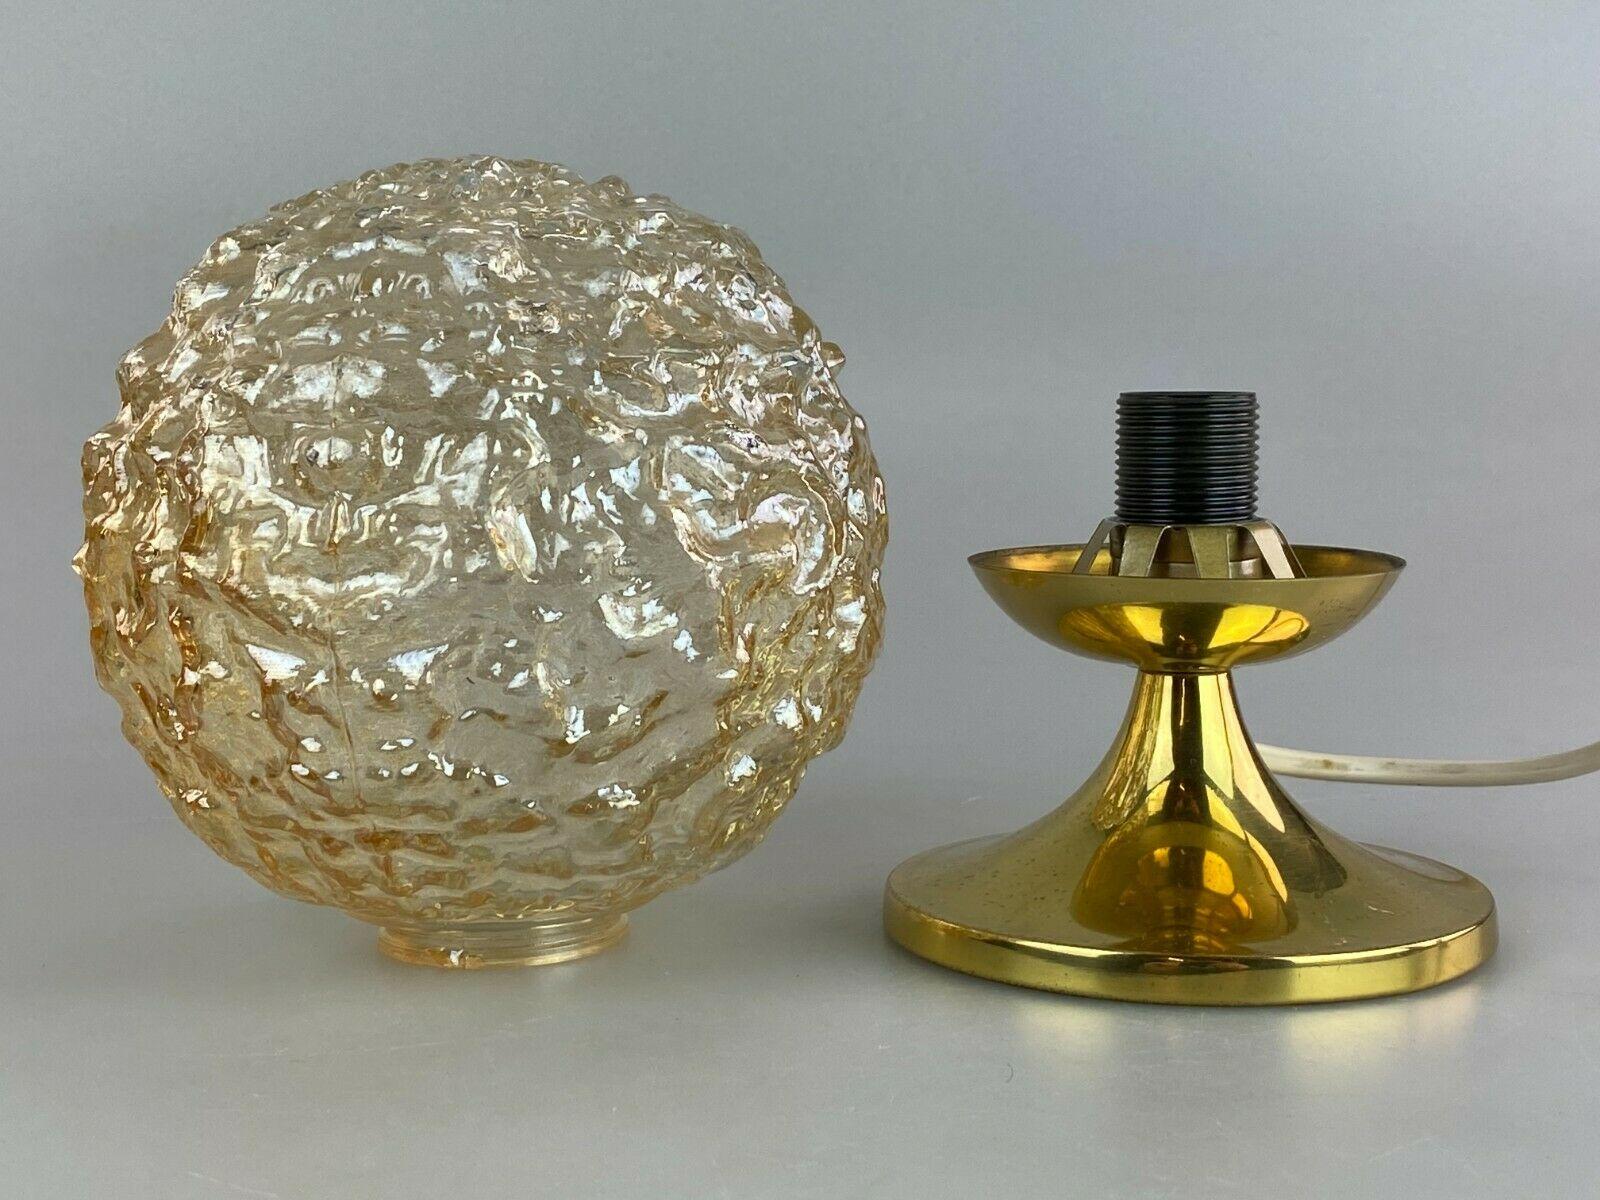 60s 70s Ball Lamp Light Table Lamp Bedside Lamp Space Age Design 5